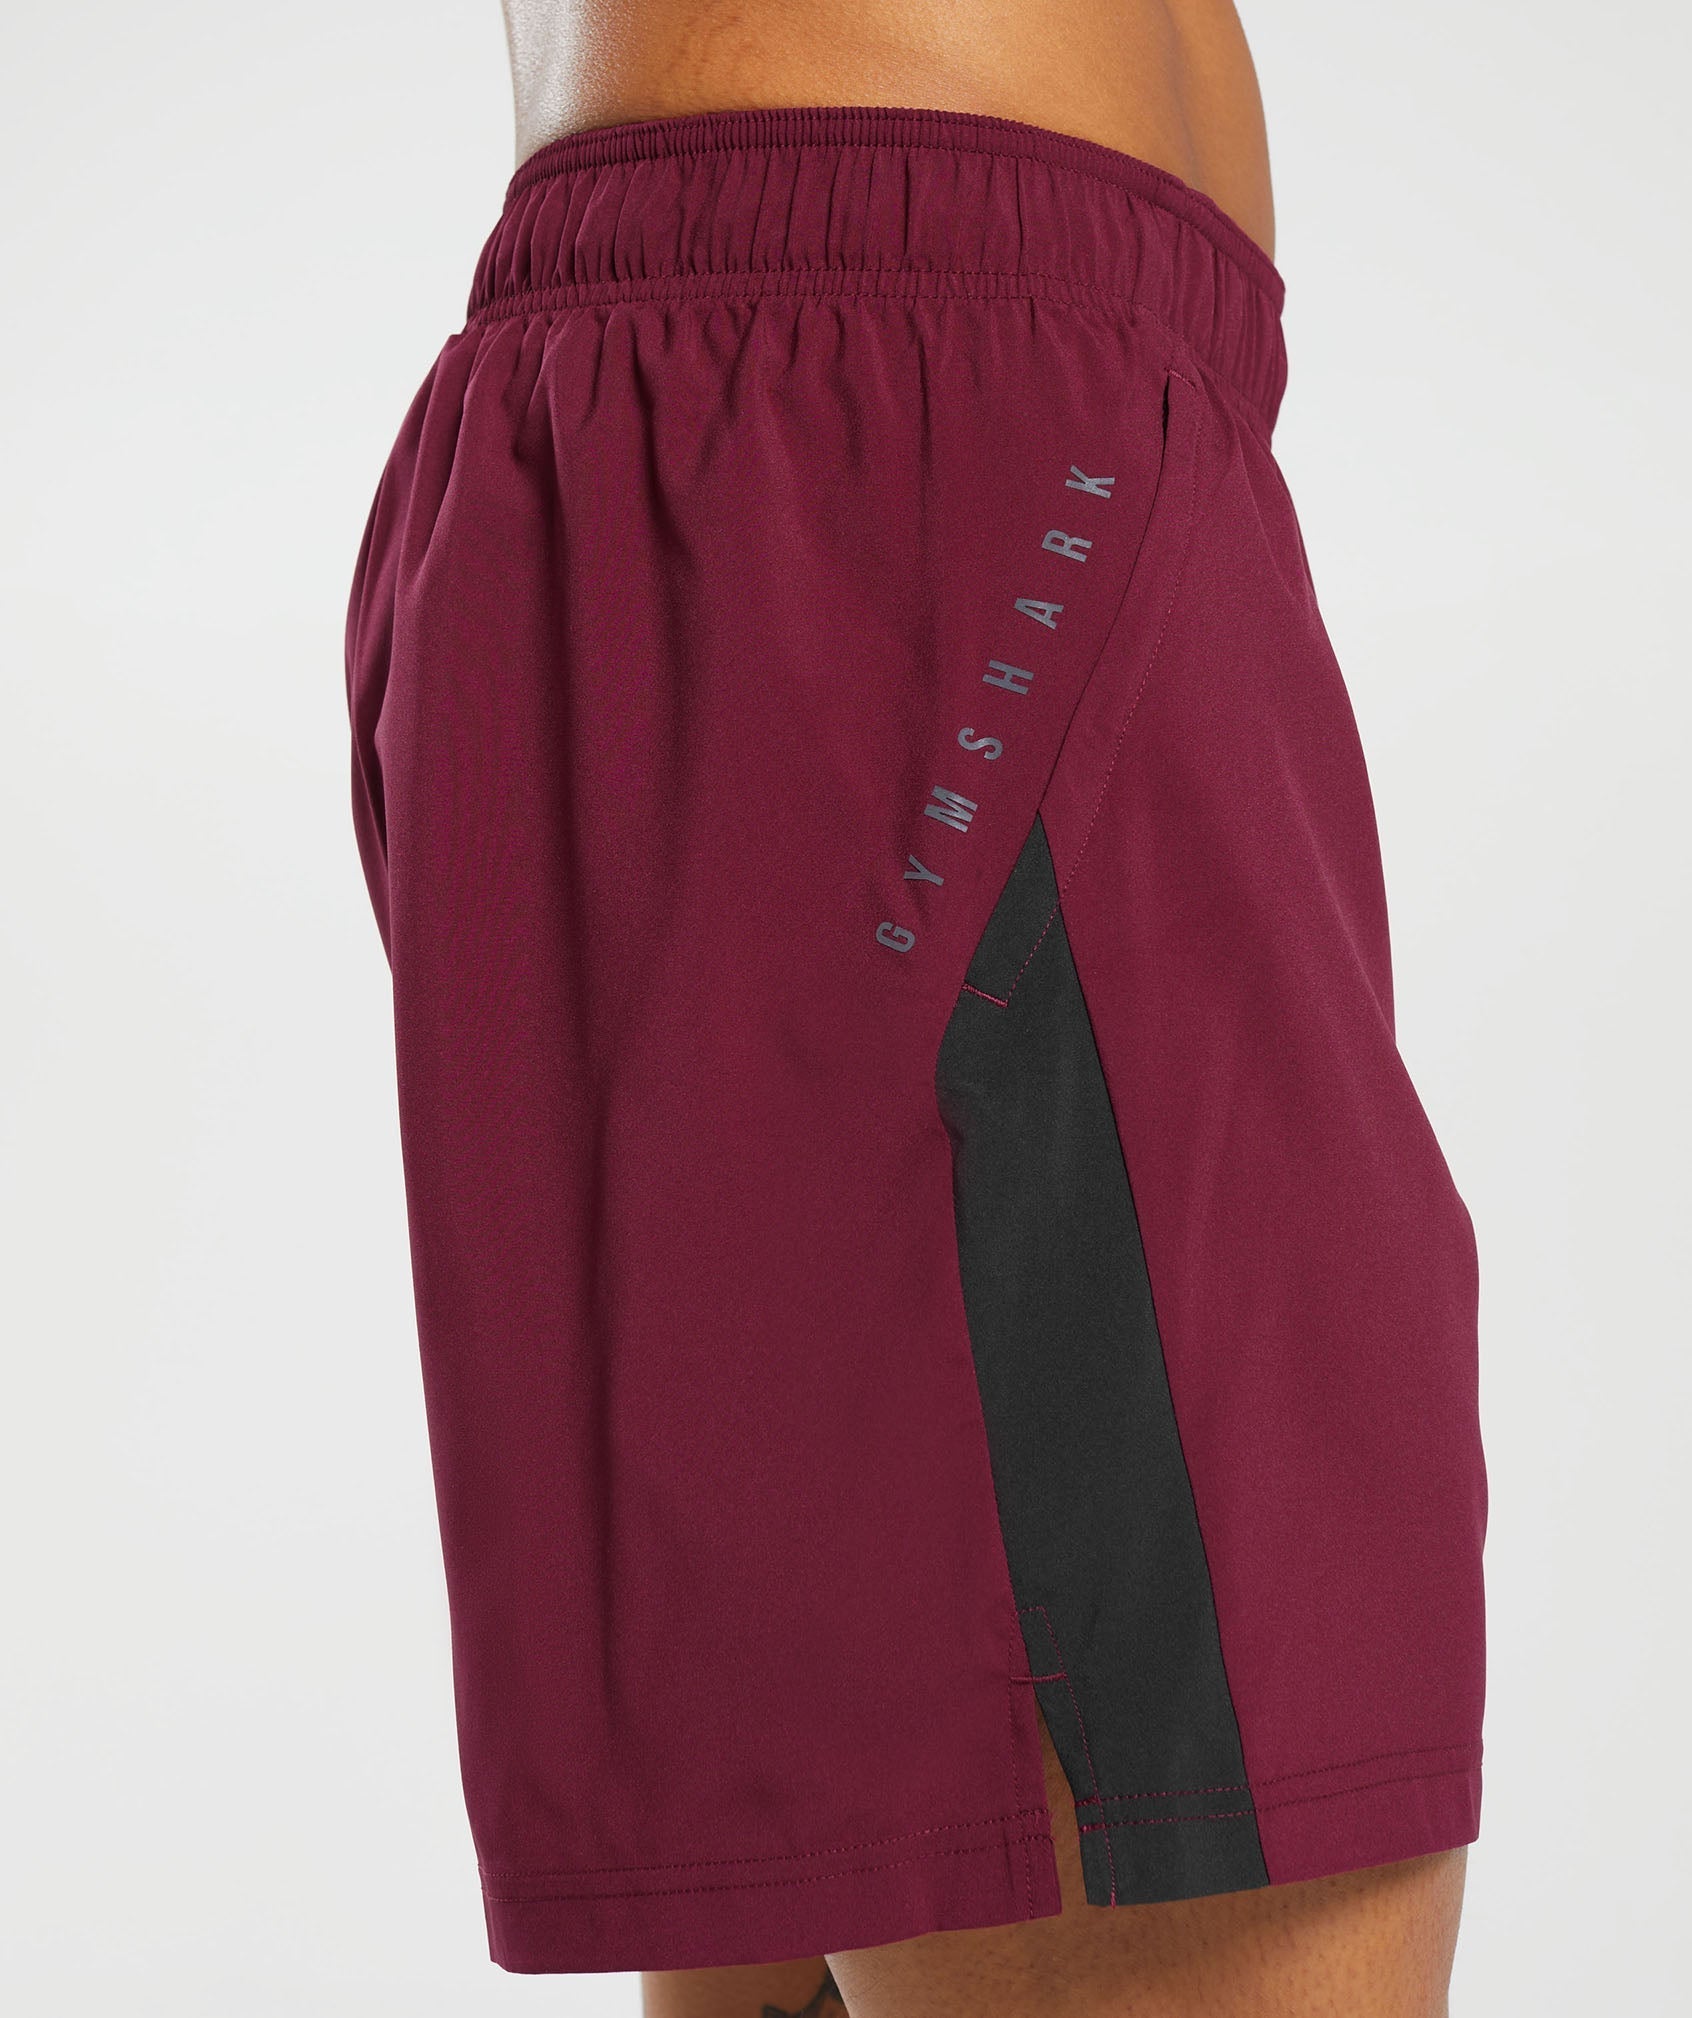 Sport  7" Shorts in Plum Pink/Black - view 5